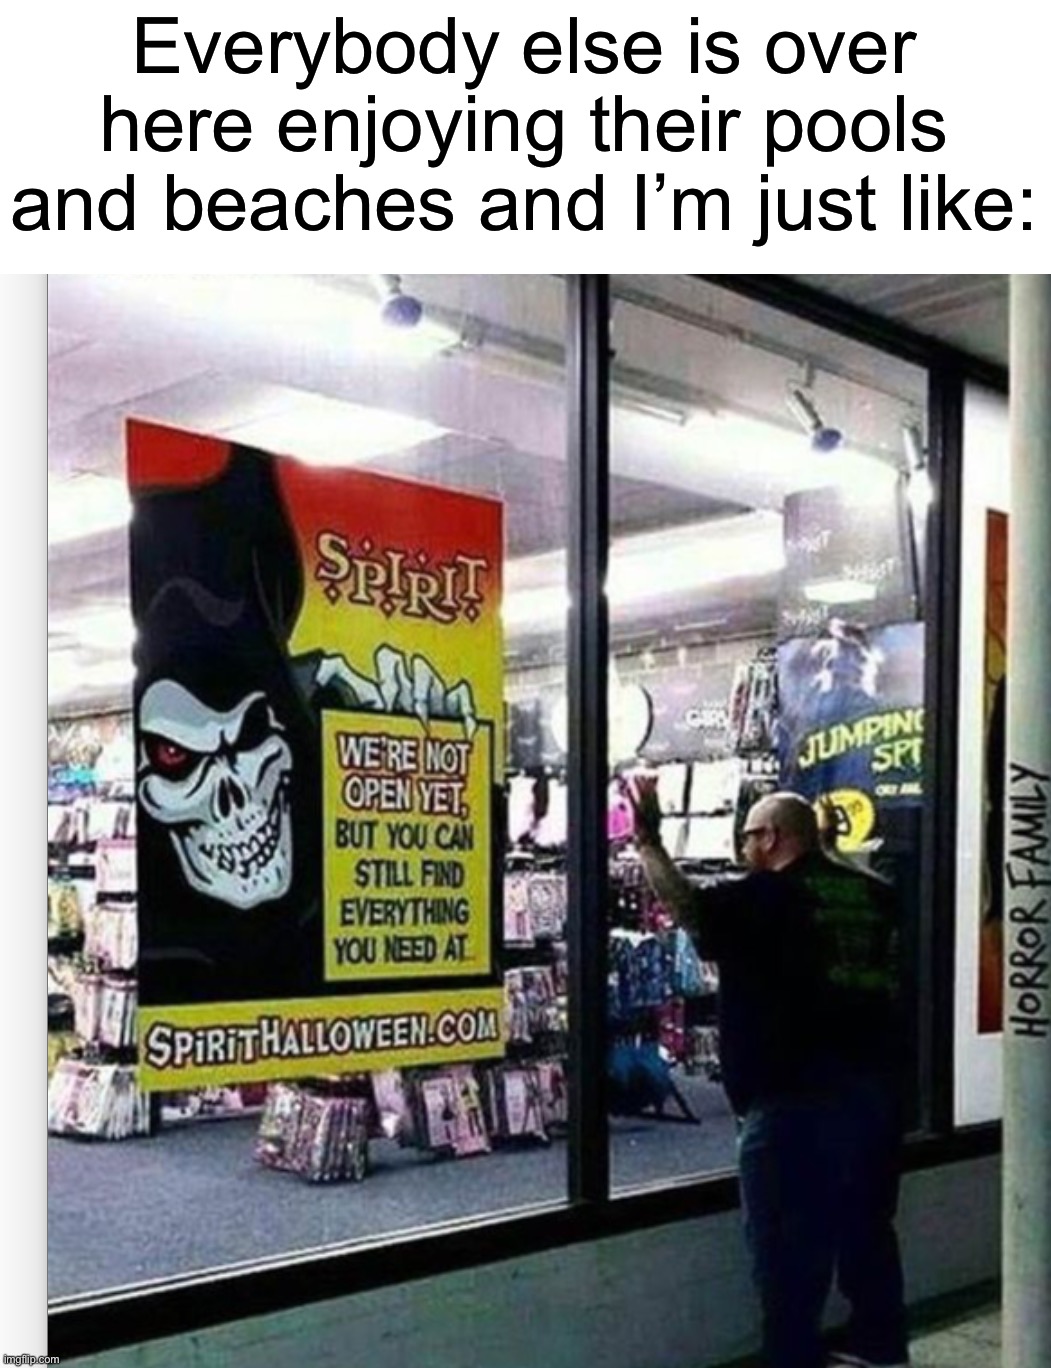 Spooky time |  Everybody else is over here enjoying their pools and beaches and I’m just like: | image tagged in memes,funny,spooky month,spirit halloween,spooktober,halloween | made w/ Imgflip meme maker